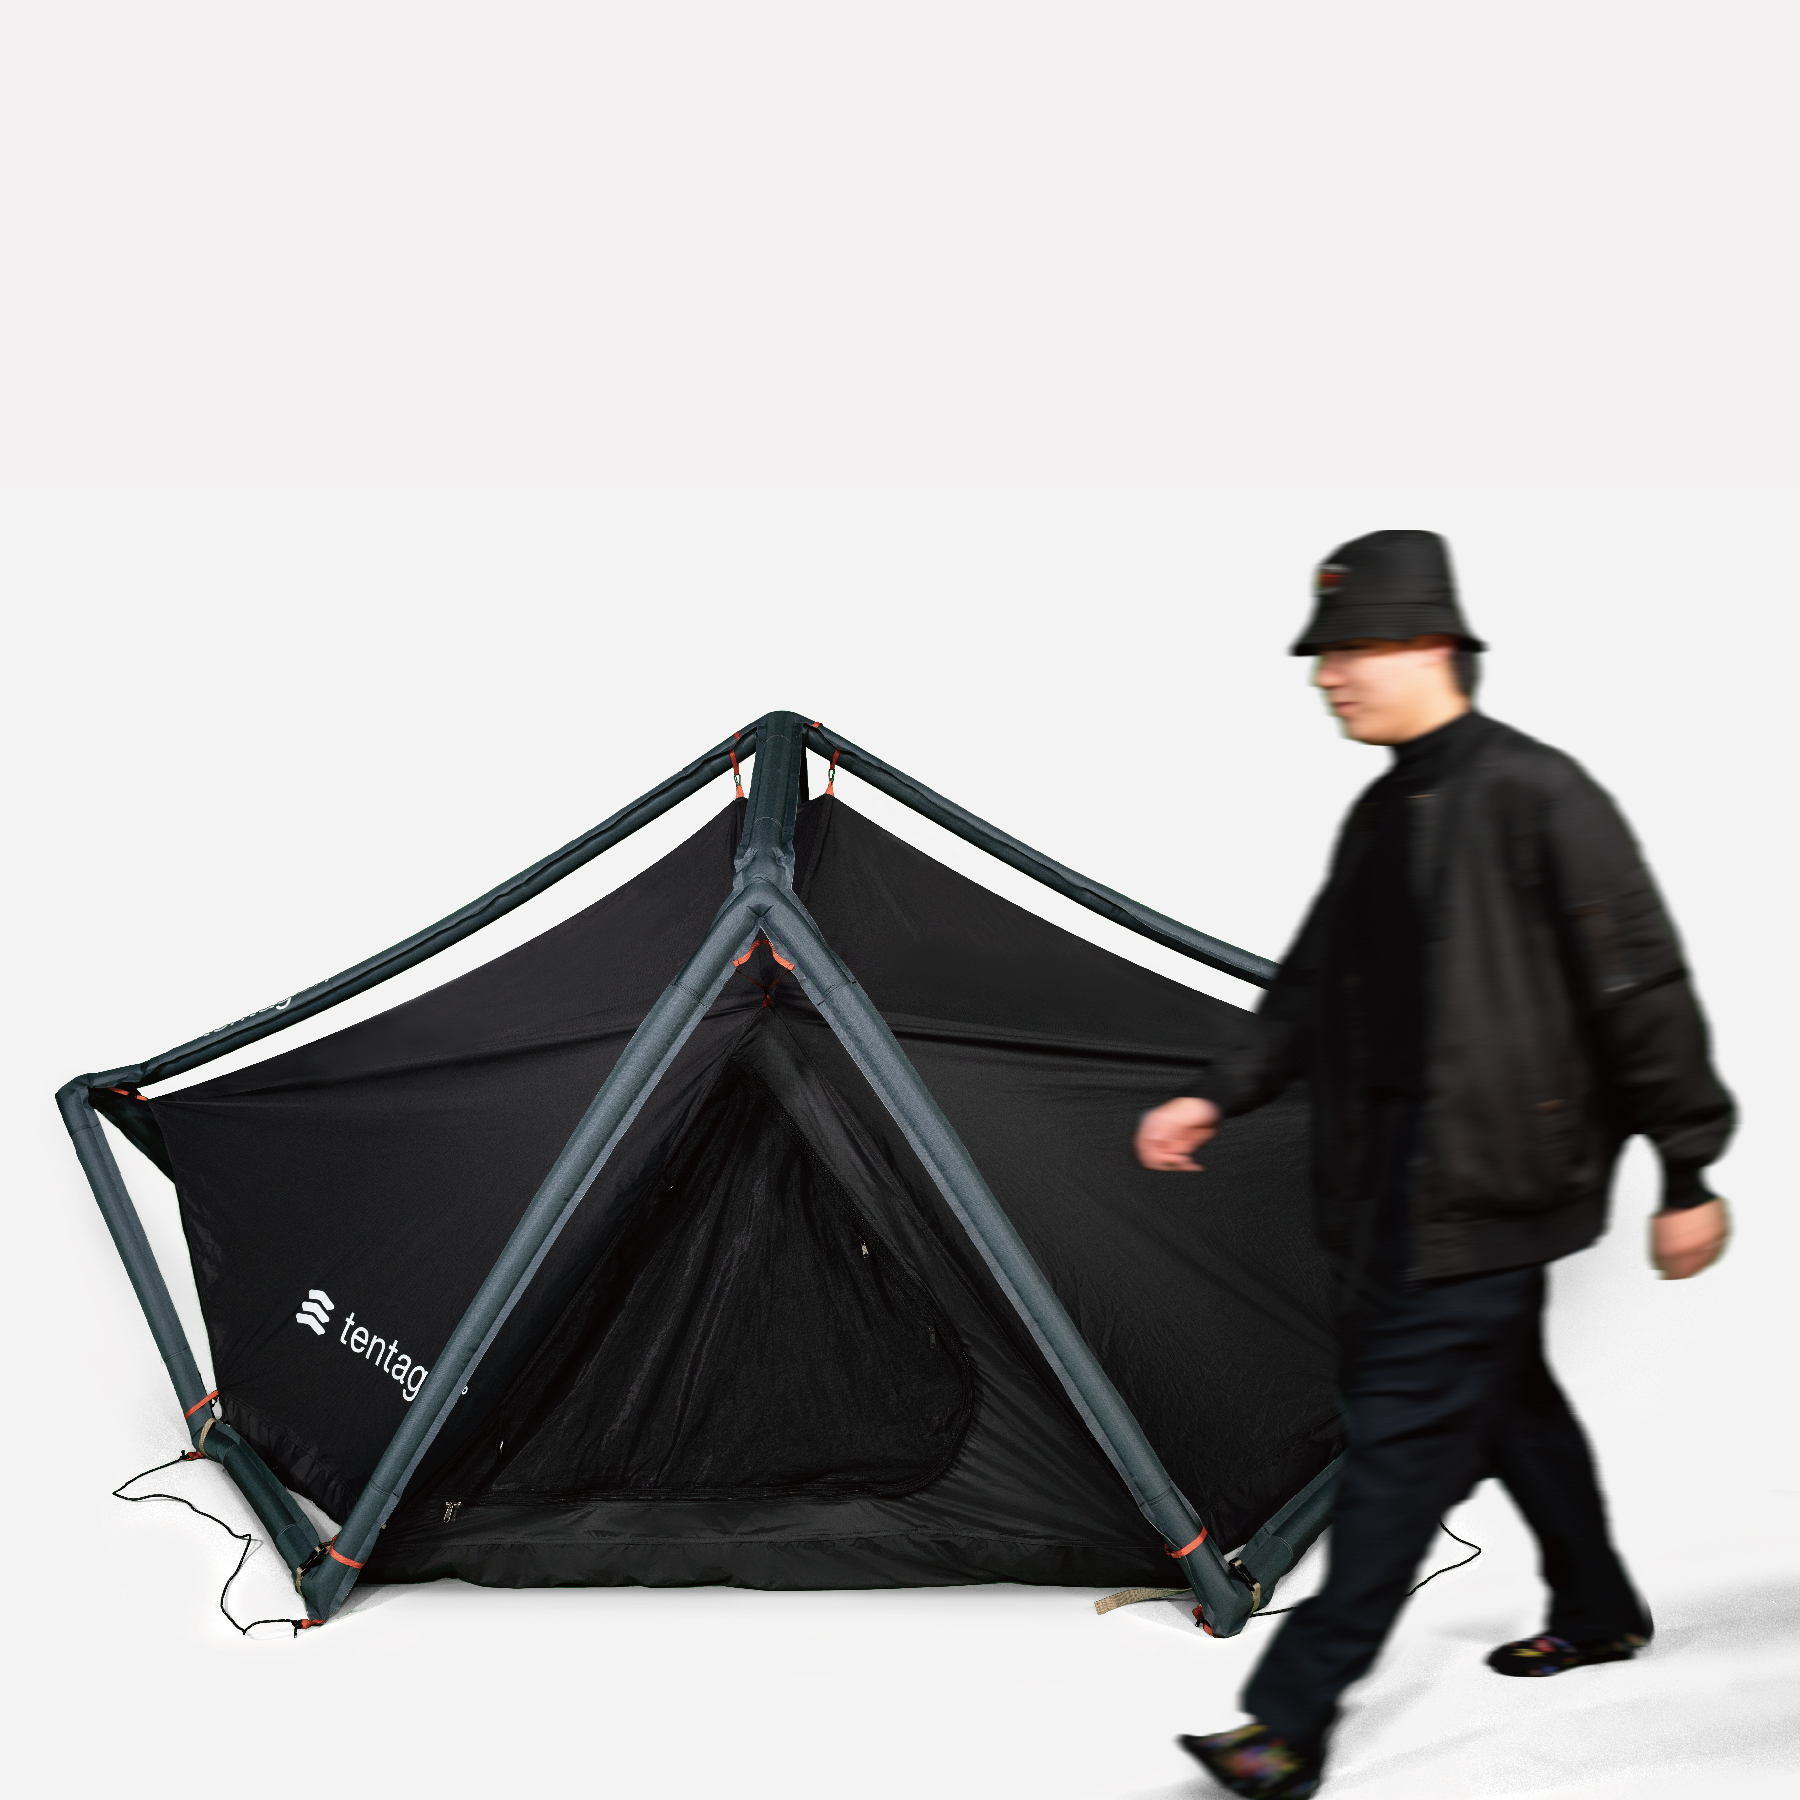 A' Design Award Winners 2021-2022 - Tentagon Inflatable Tent by Wei Chen and Chi-Yung Li